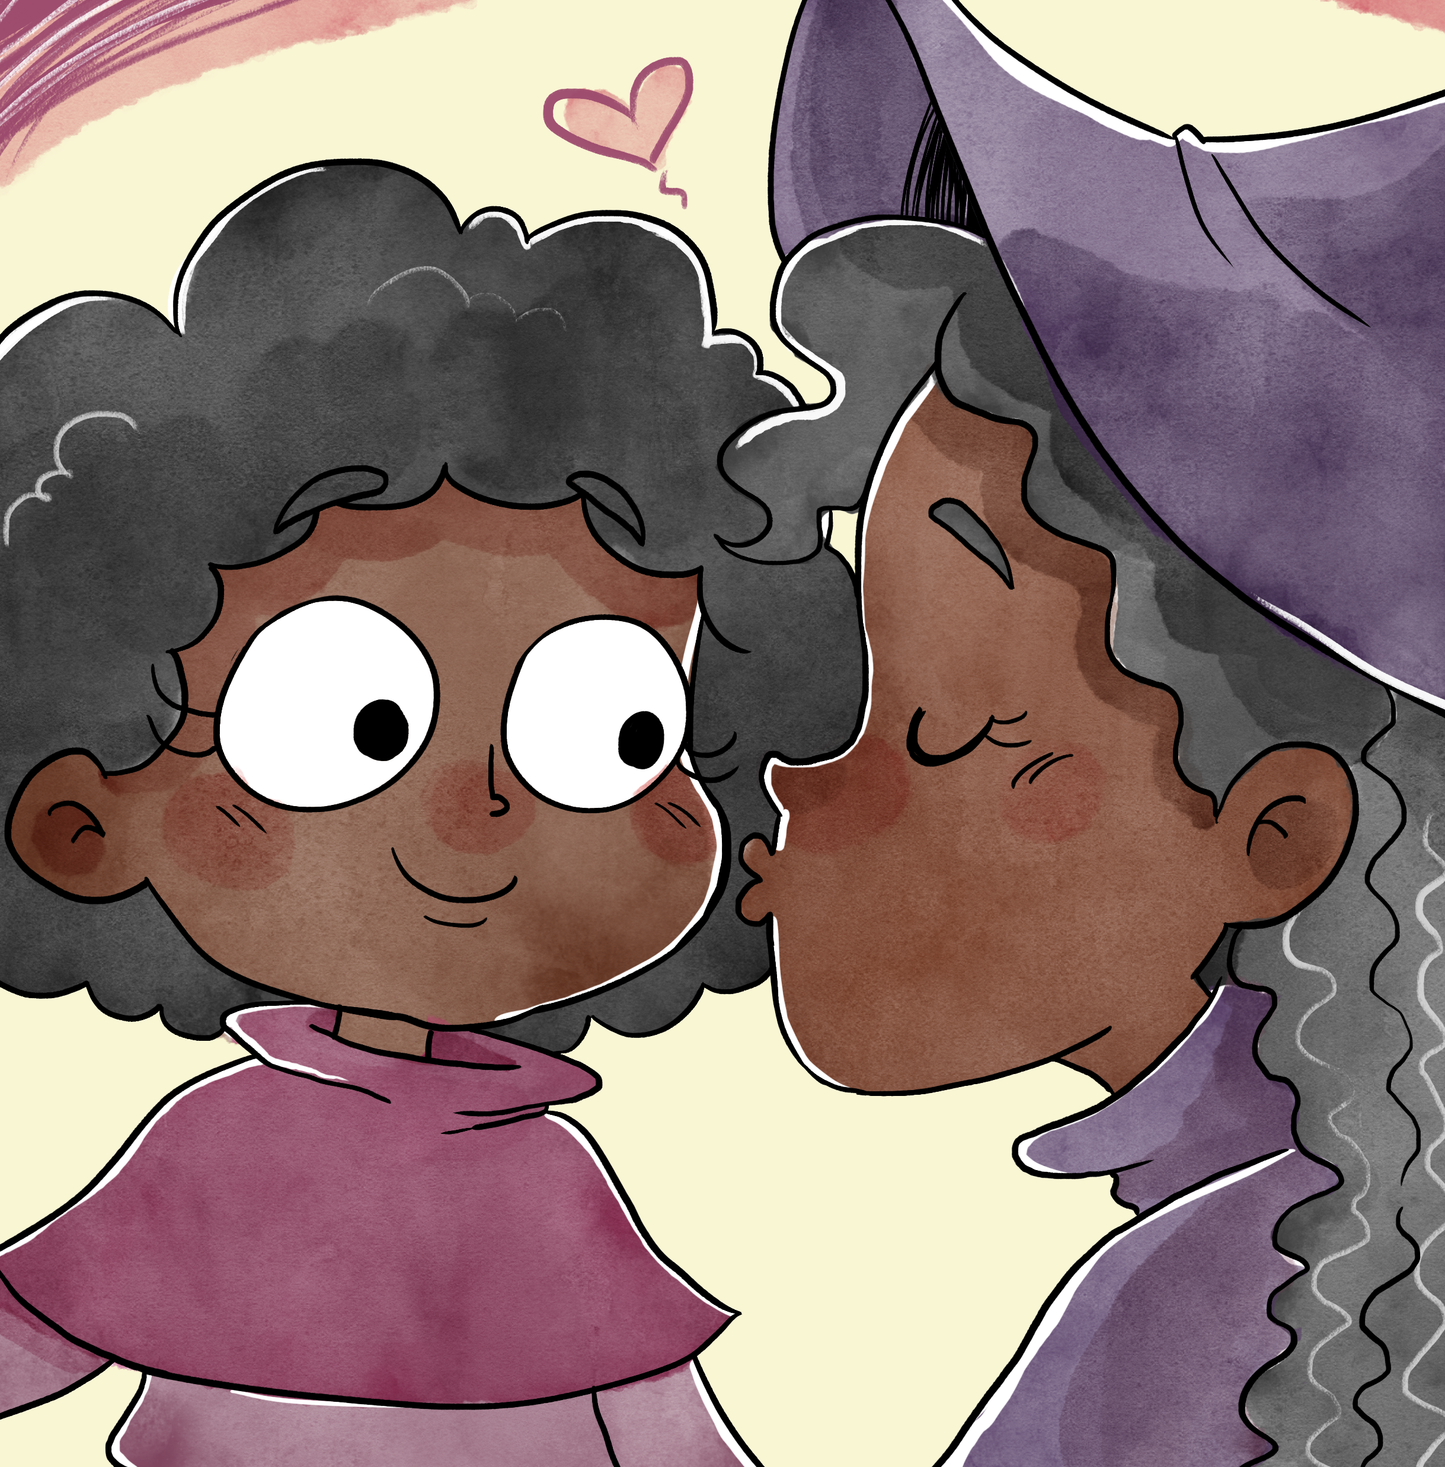 The Witch and the Anxious Broomstick: A Halloween-Inspired Children's Book About Overcoming Anxiety, Worry, and Fear.